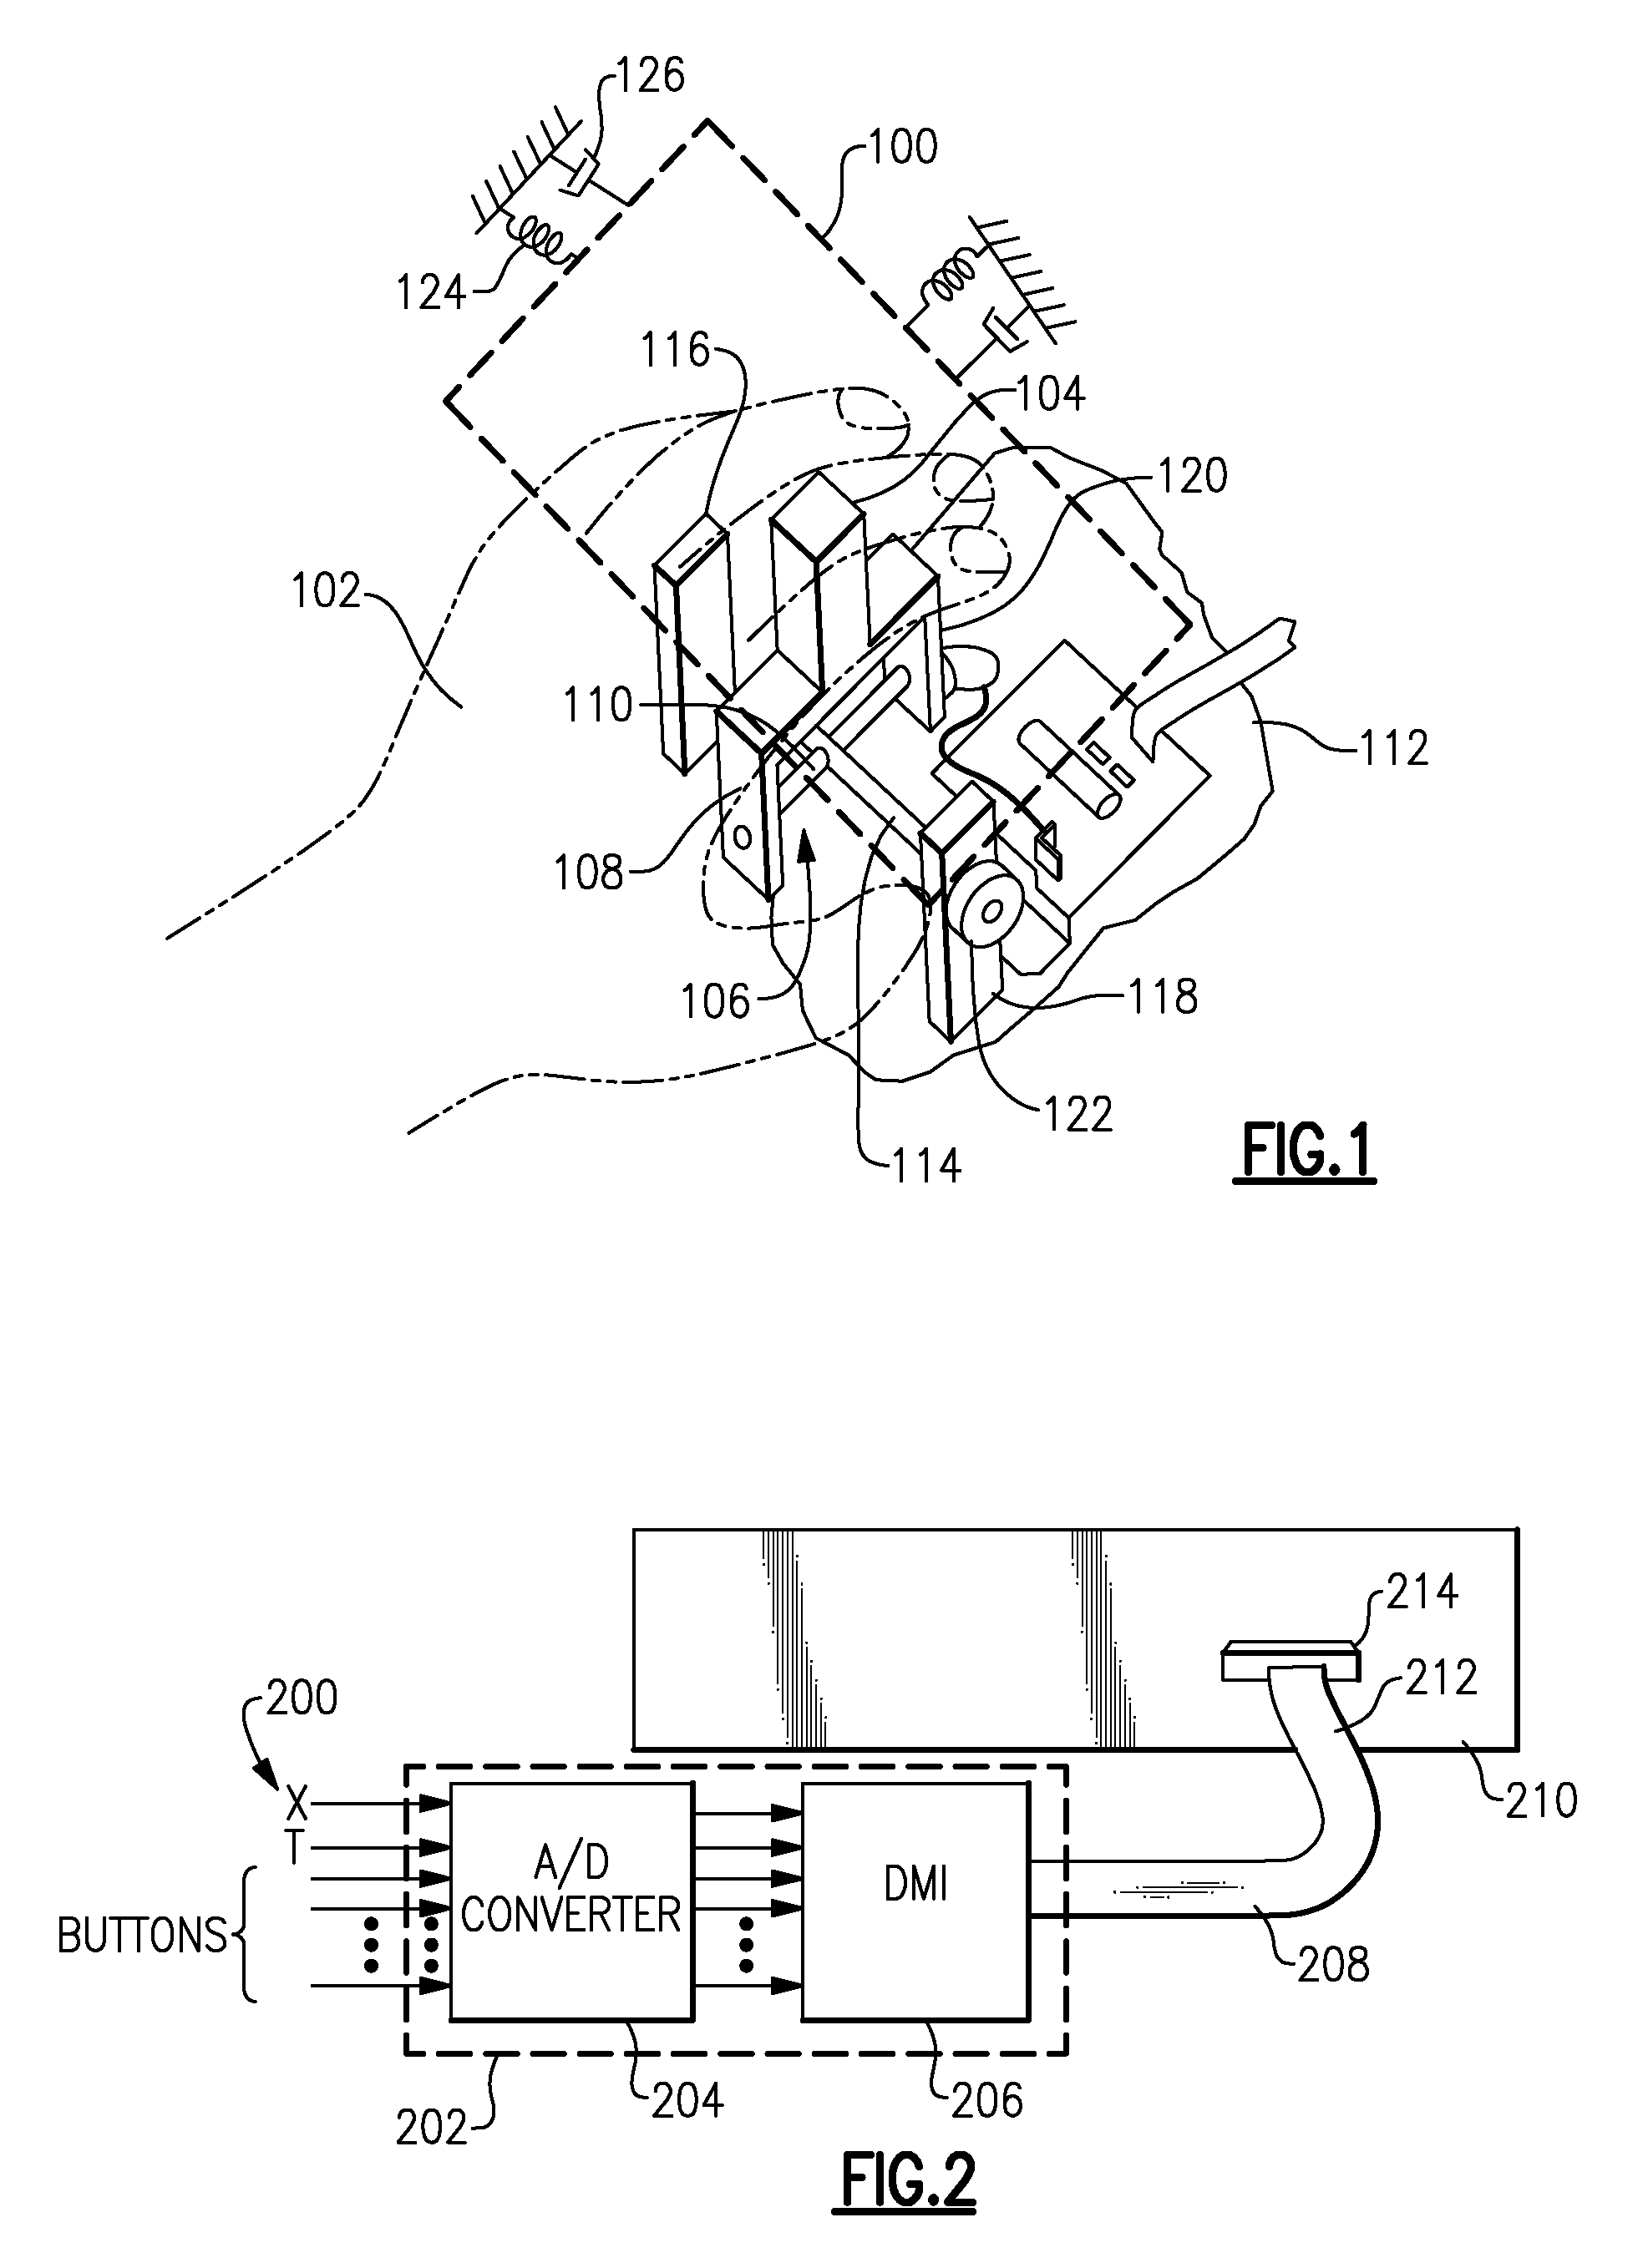 Hand Activated Input Device with Horizontal Control Surface